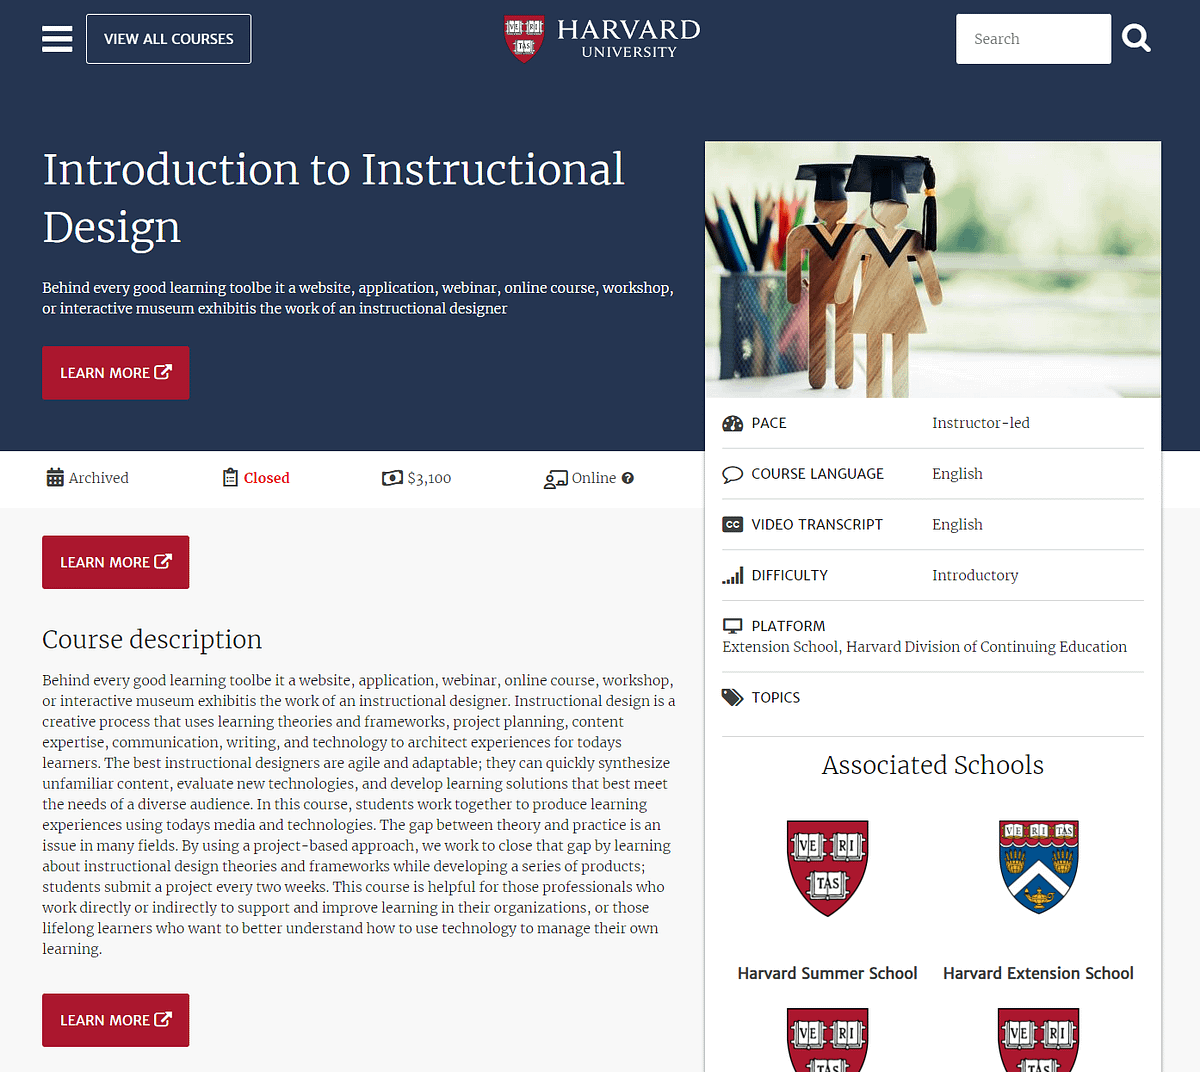 The home page for Harvard's Introduction to Instructional Design course.